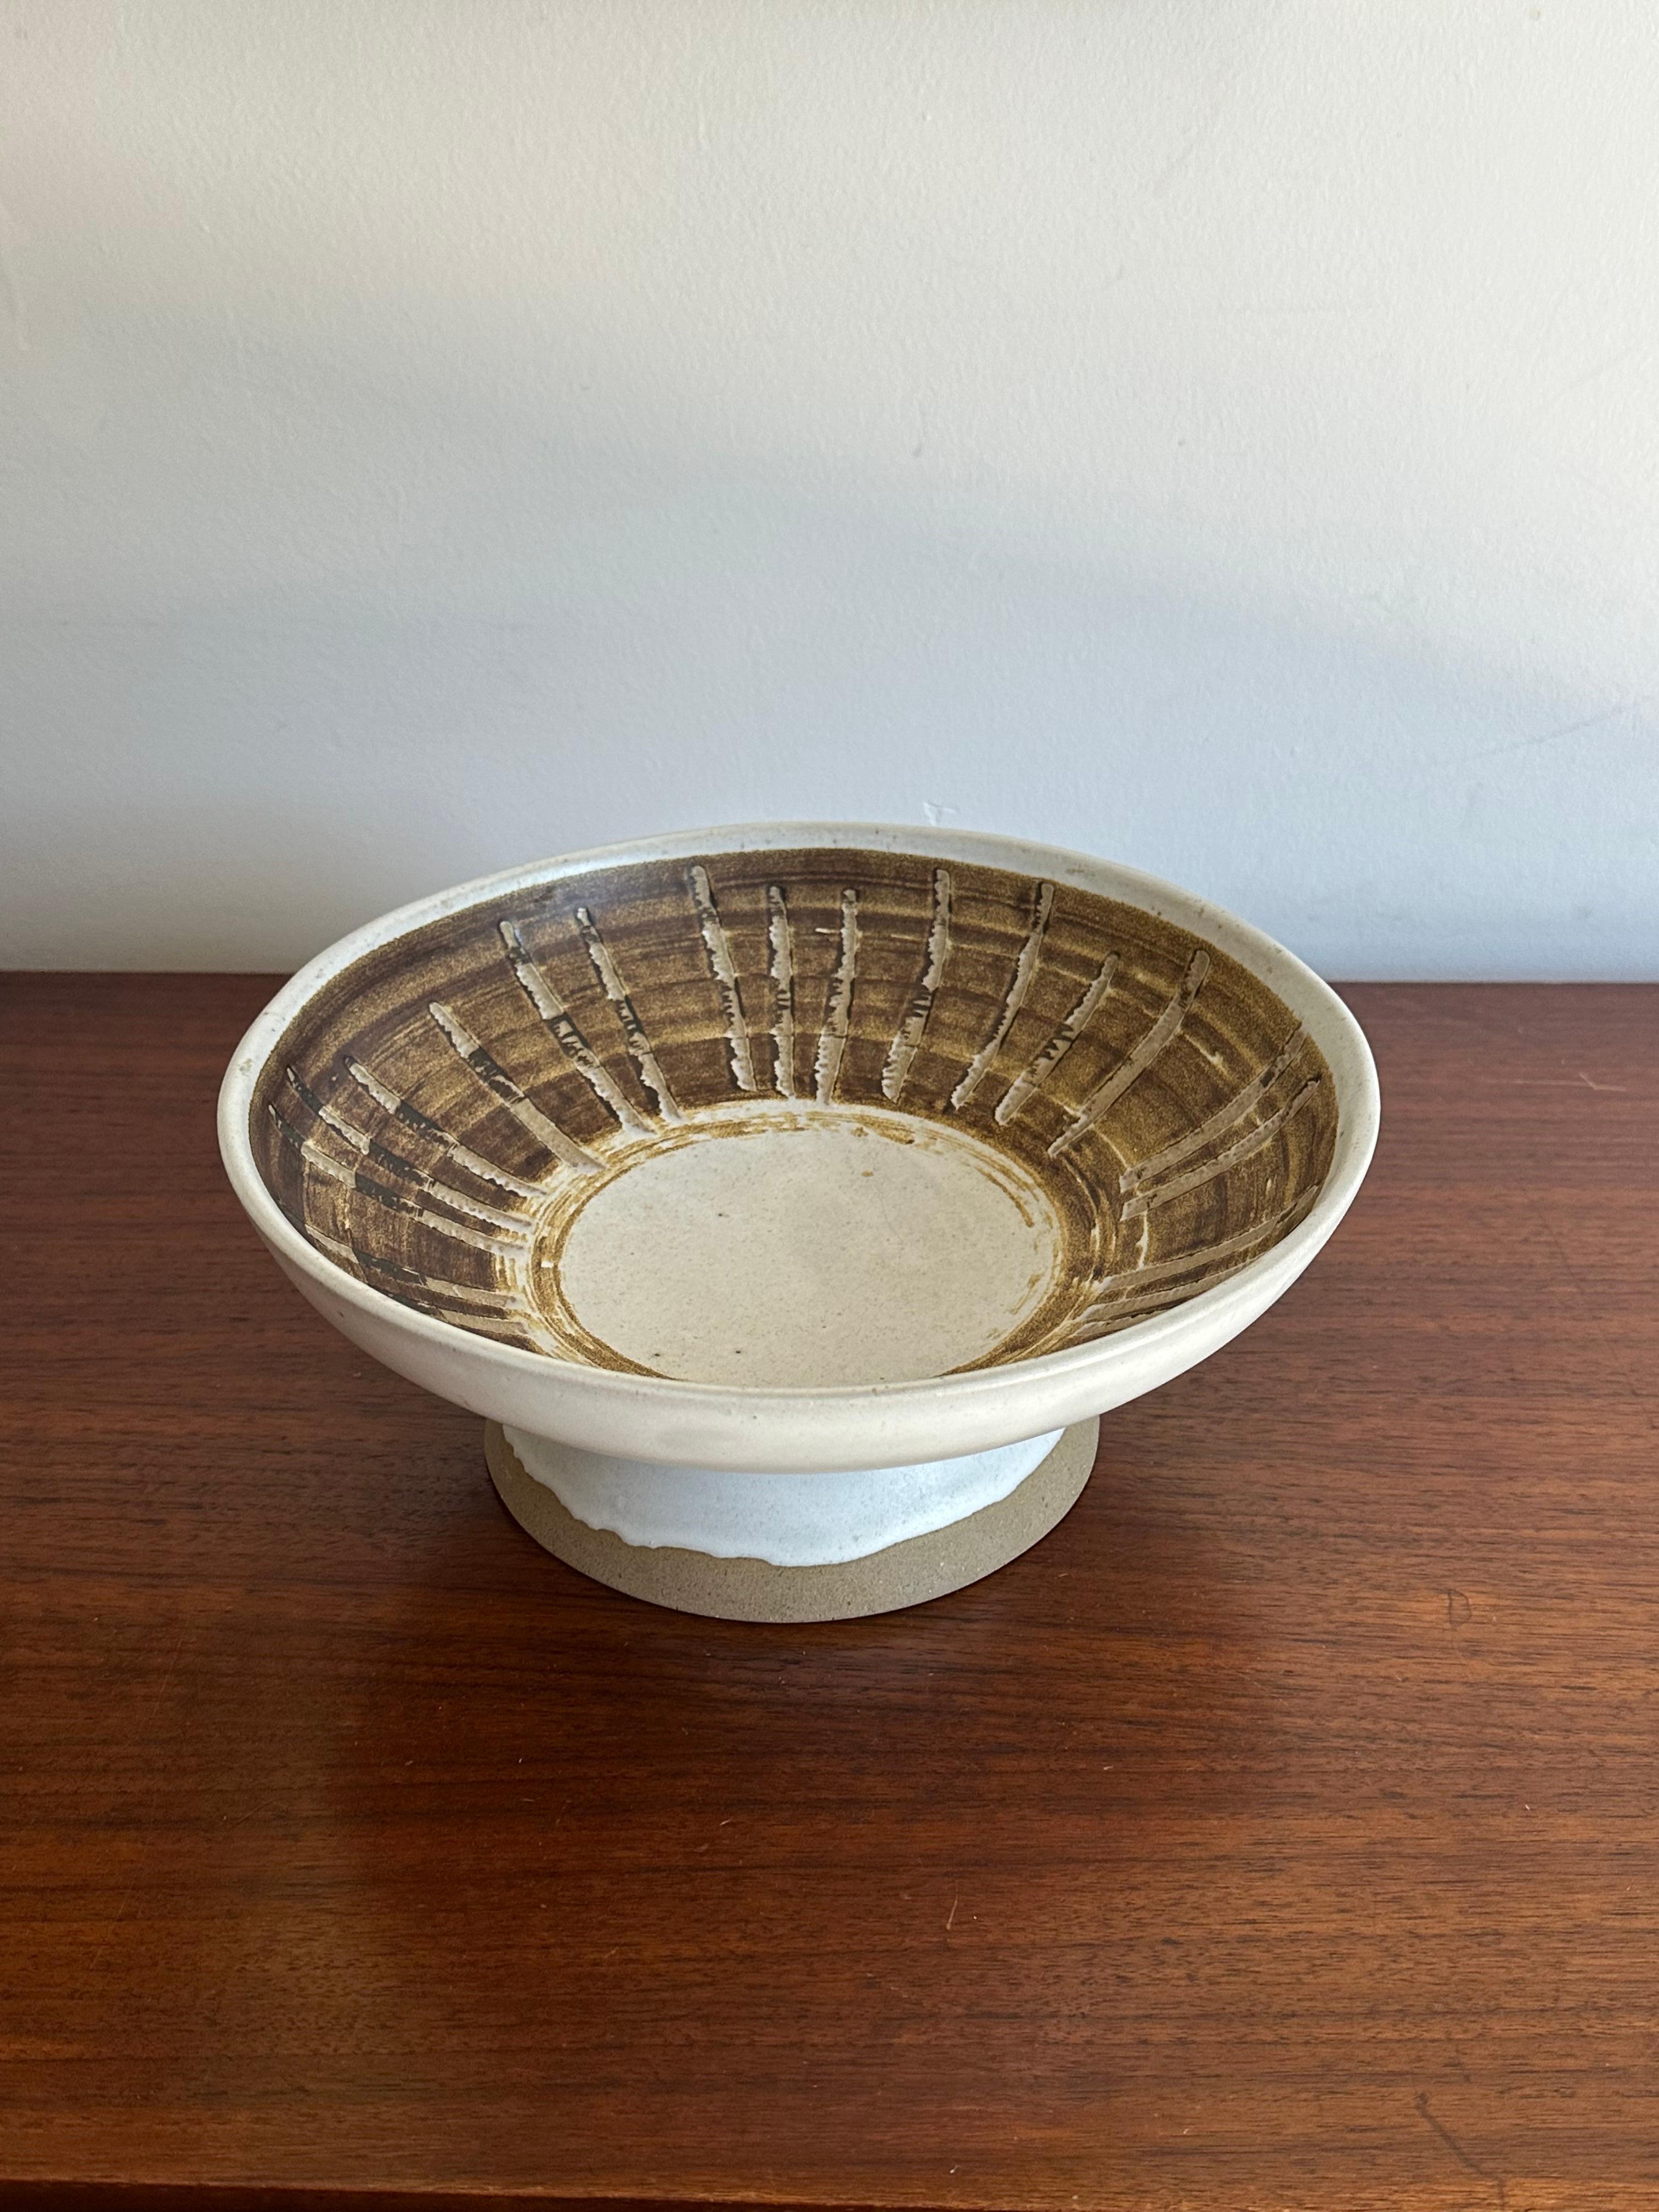 A large footed bowl produced by Marshall Studios, circa 1970s. Would work nicely as a center bowl/fruit bowl. Marshall Studios was the infamous company which produced countless lamps by famed ceramicist duo Jane and Gordon Martz. In additional to